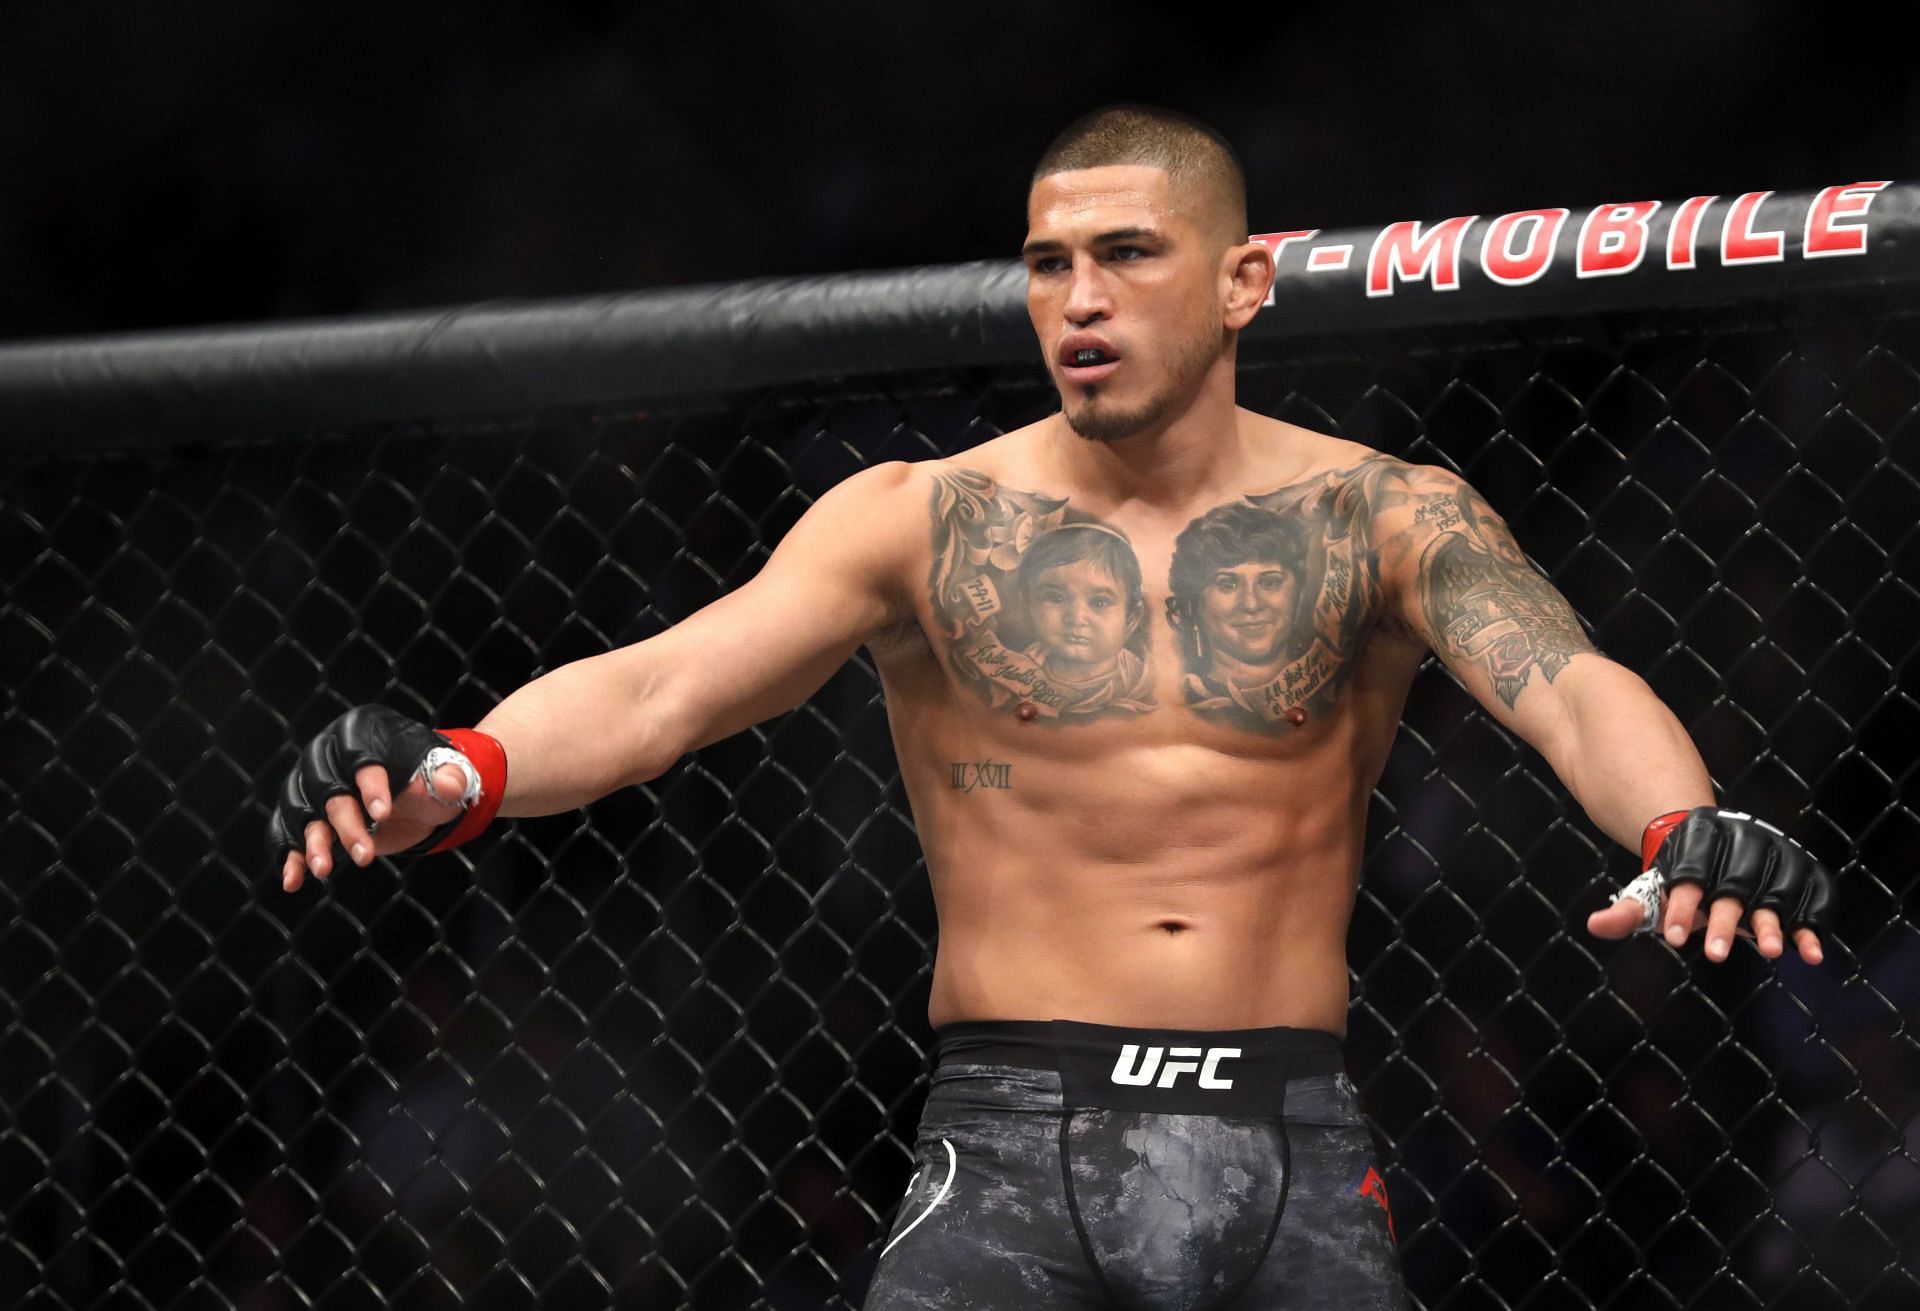 Anthony Pettis holds a record of 24-12